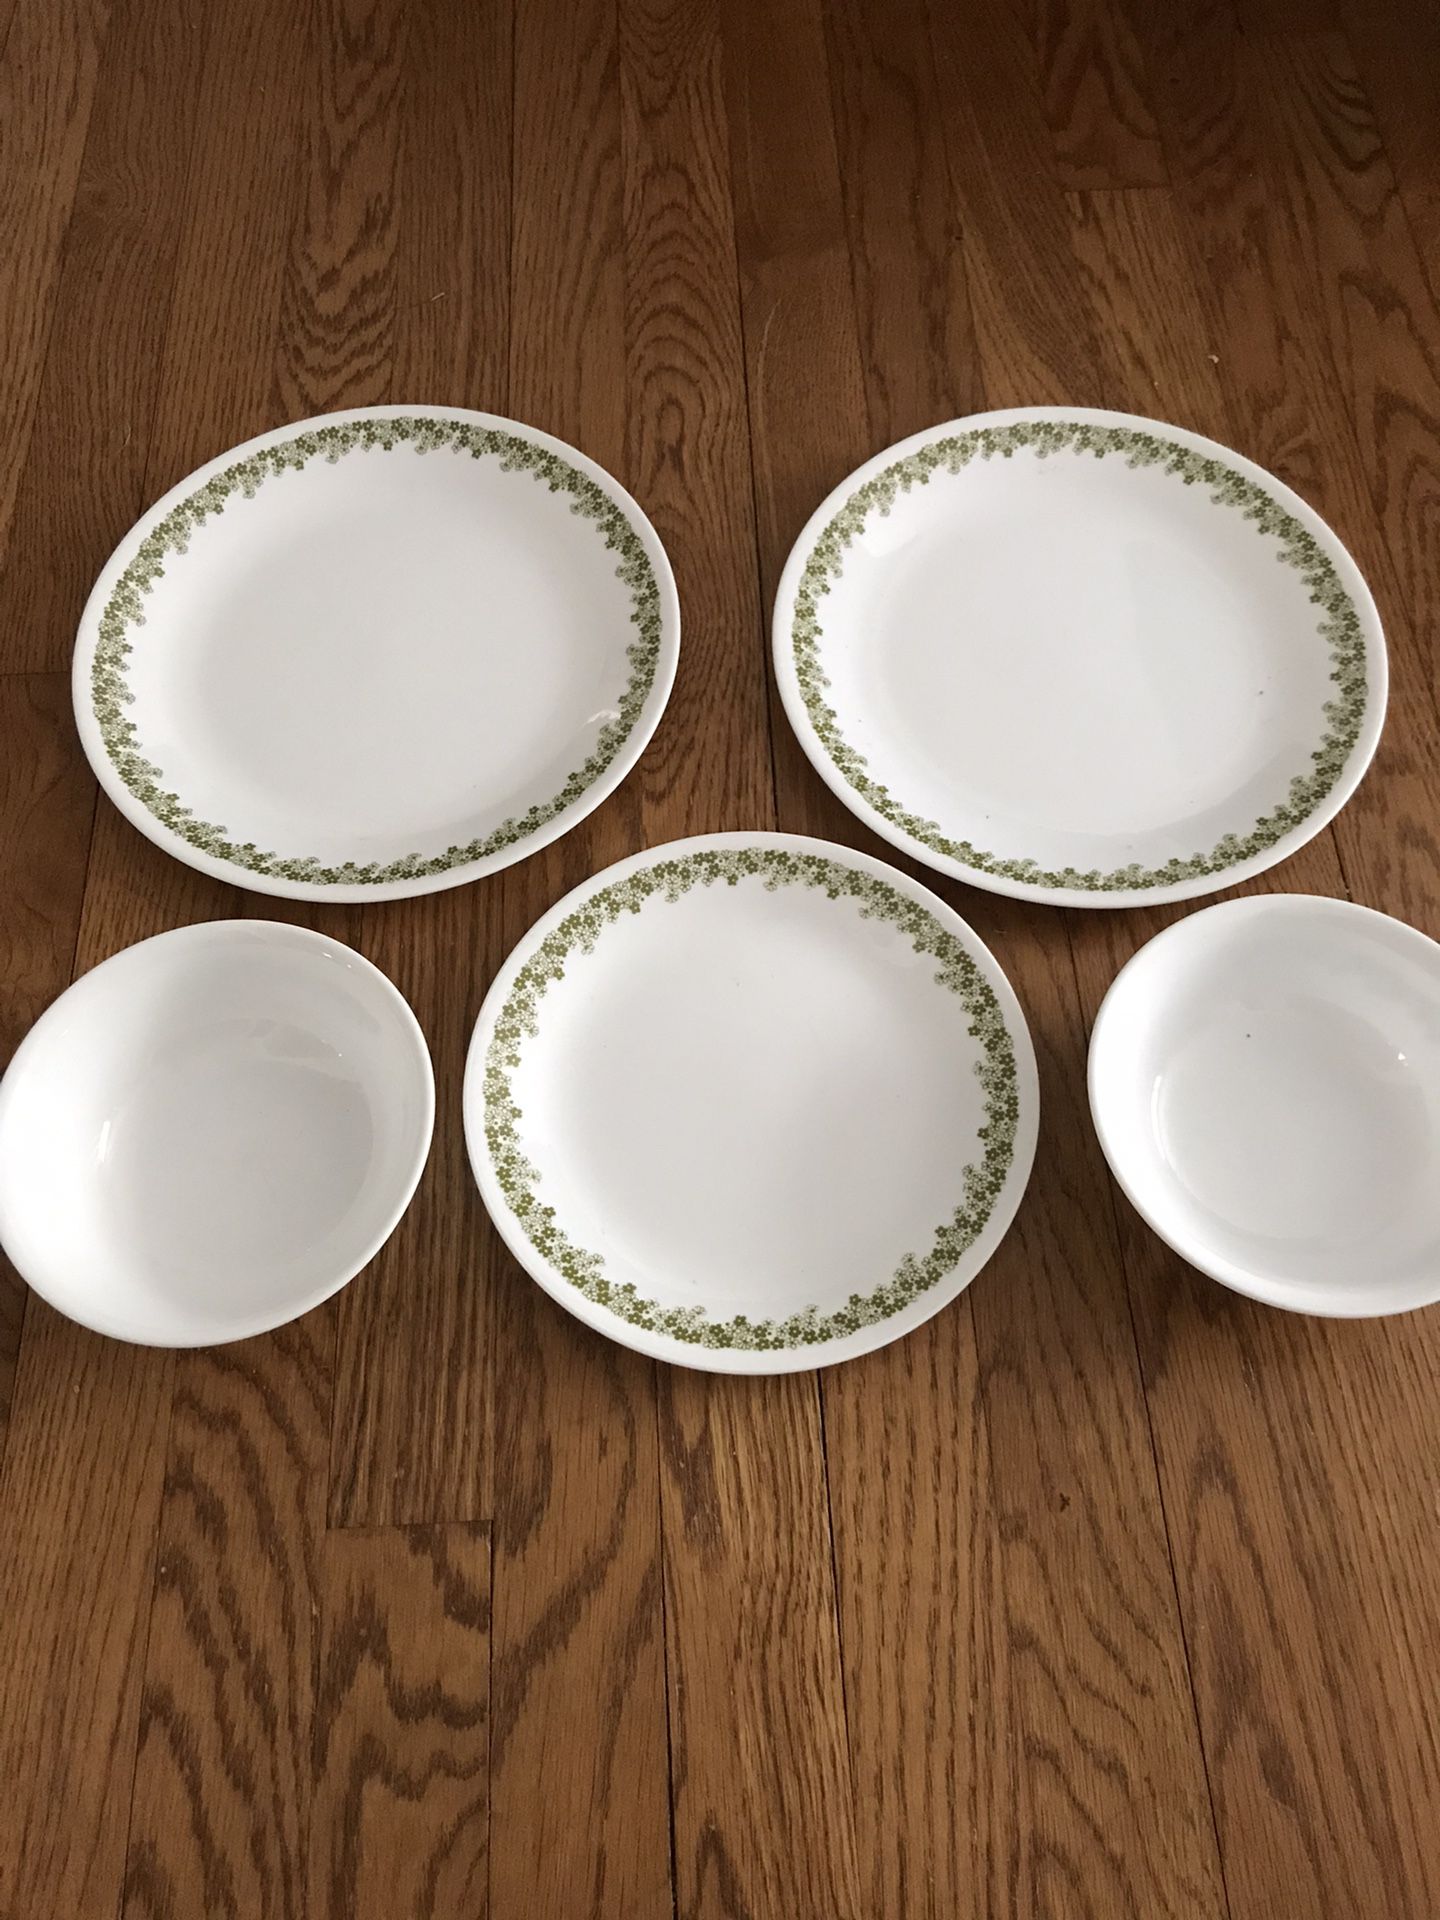 5 Pieces Of Vintage Corelle By Corning Crazy Daisy Spring Blossoms Dishes